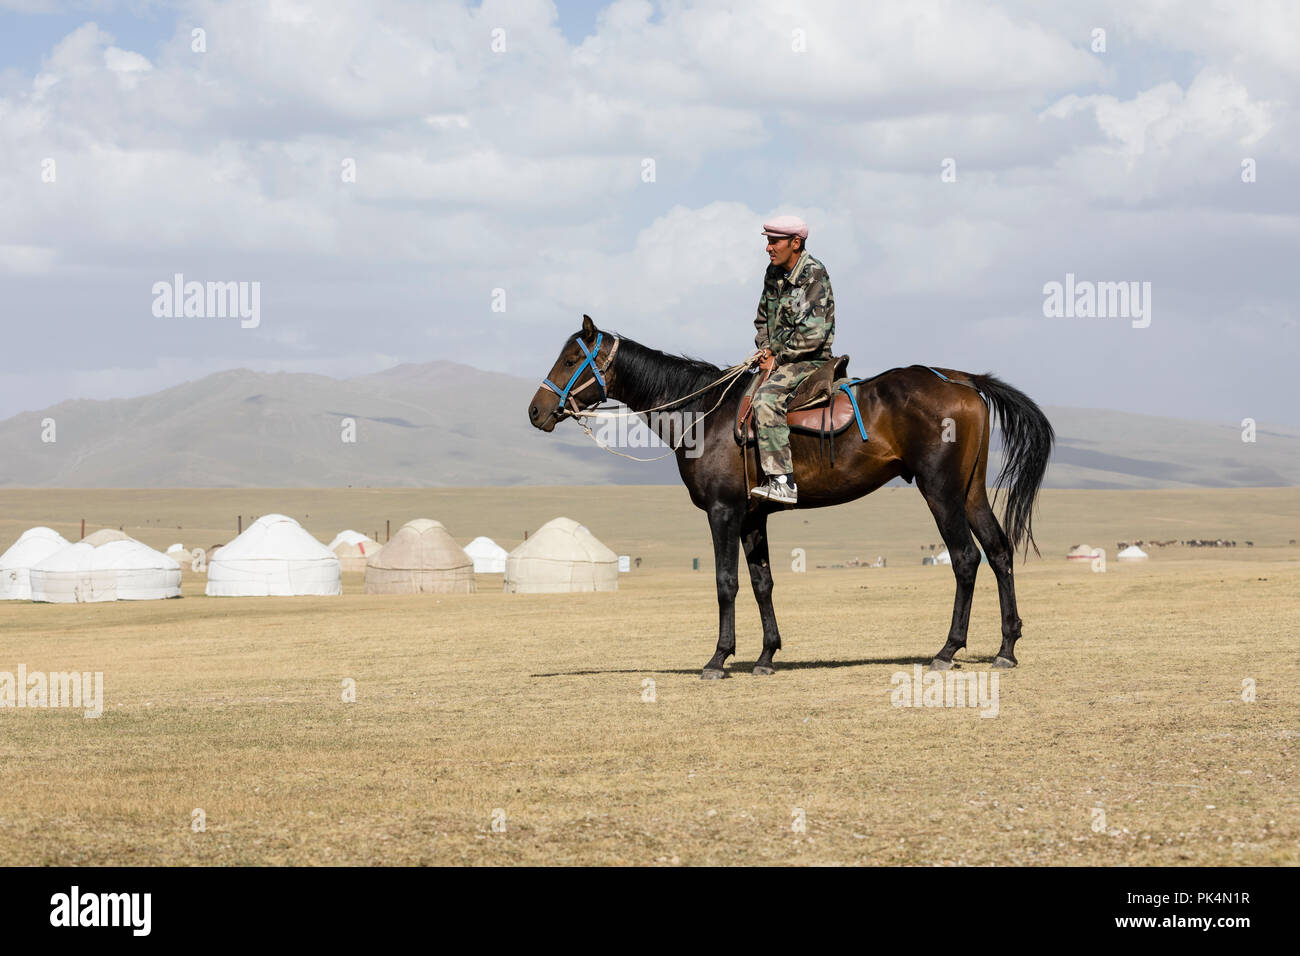 Song Kul, Kyrgyzstan, August 8 2018: A Kyrgyz sits on a horse at Song Kul Lake in Kyrgyzstan Stock Photo